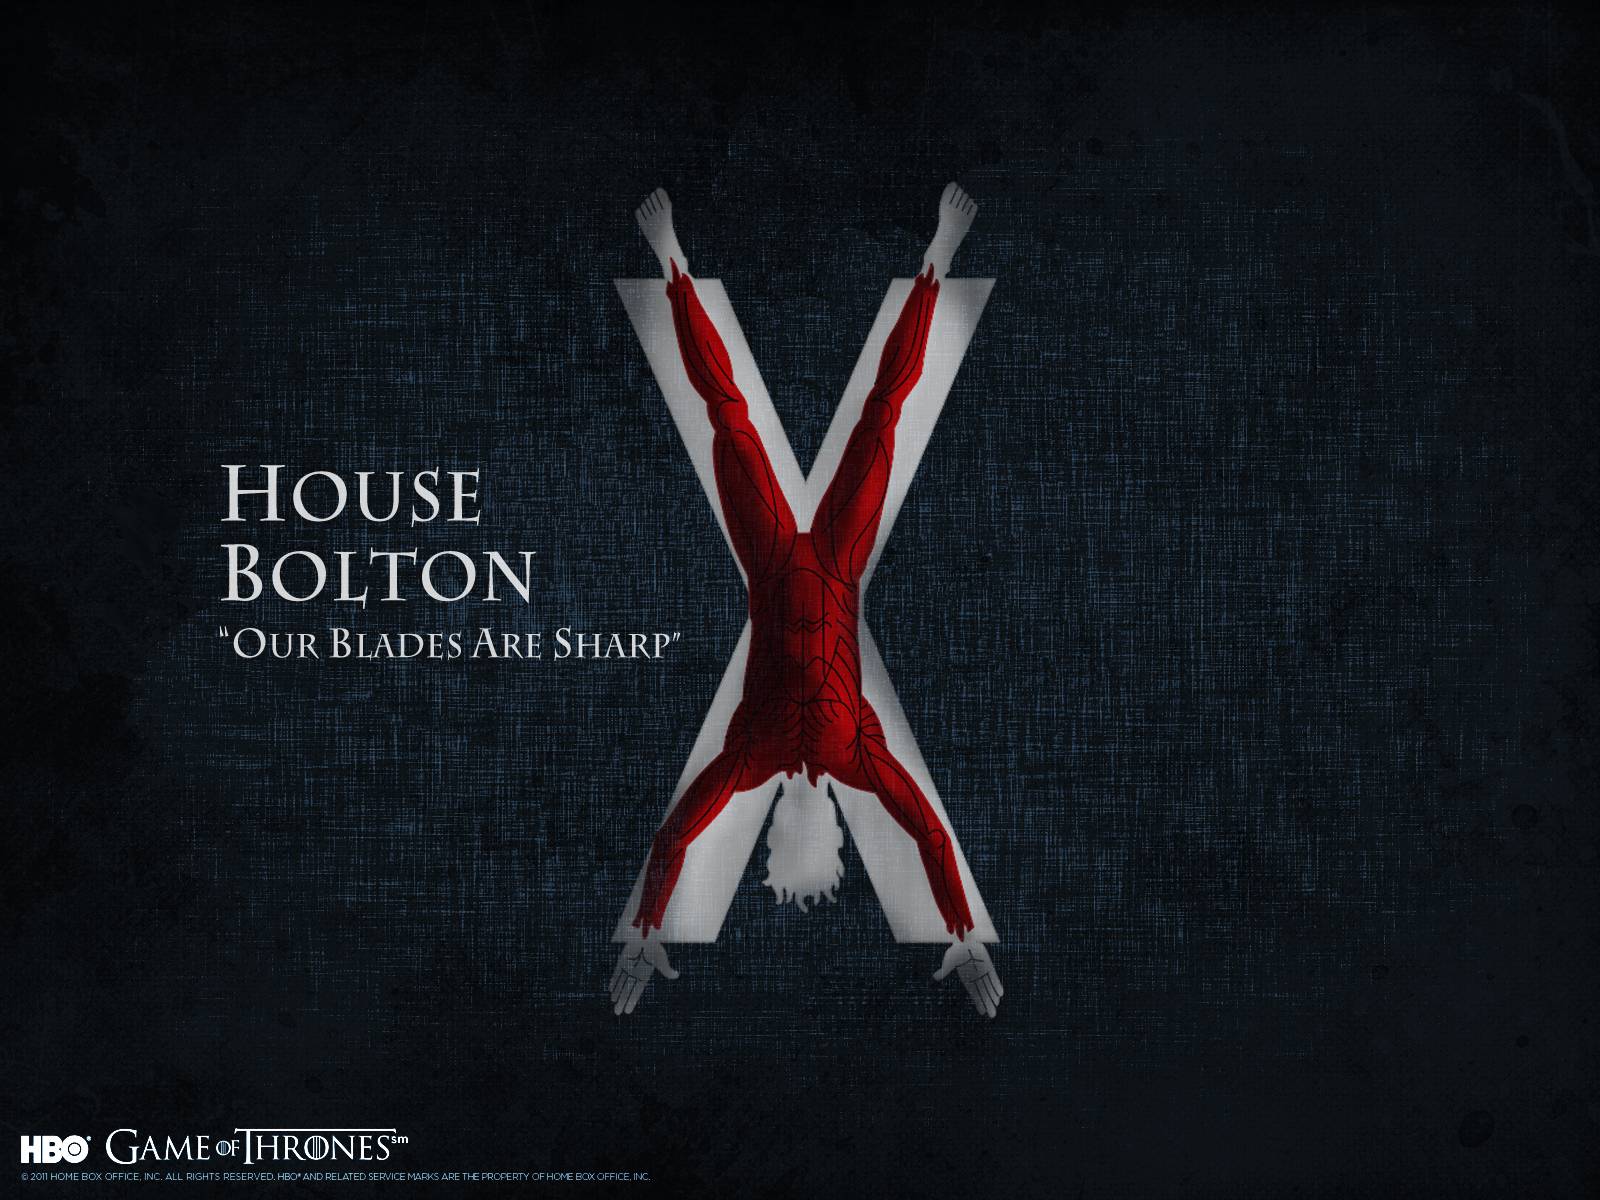 Game Of Thrones Hintergrundbild 1600x1200. Free download House Bolton Game of Thrones Wallpaper [1600x1200] for your Desktop, Mobile & Tablet. Explore Game of Thrones Sigil Wallpaper. Hbo Game Of Thrones Wallpaper, Game of Thrones